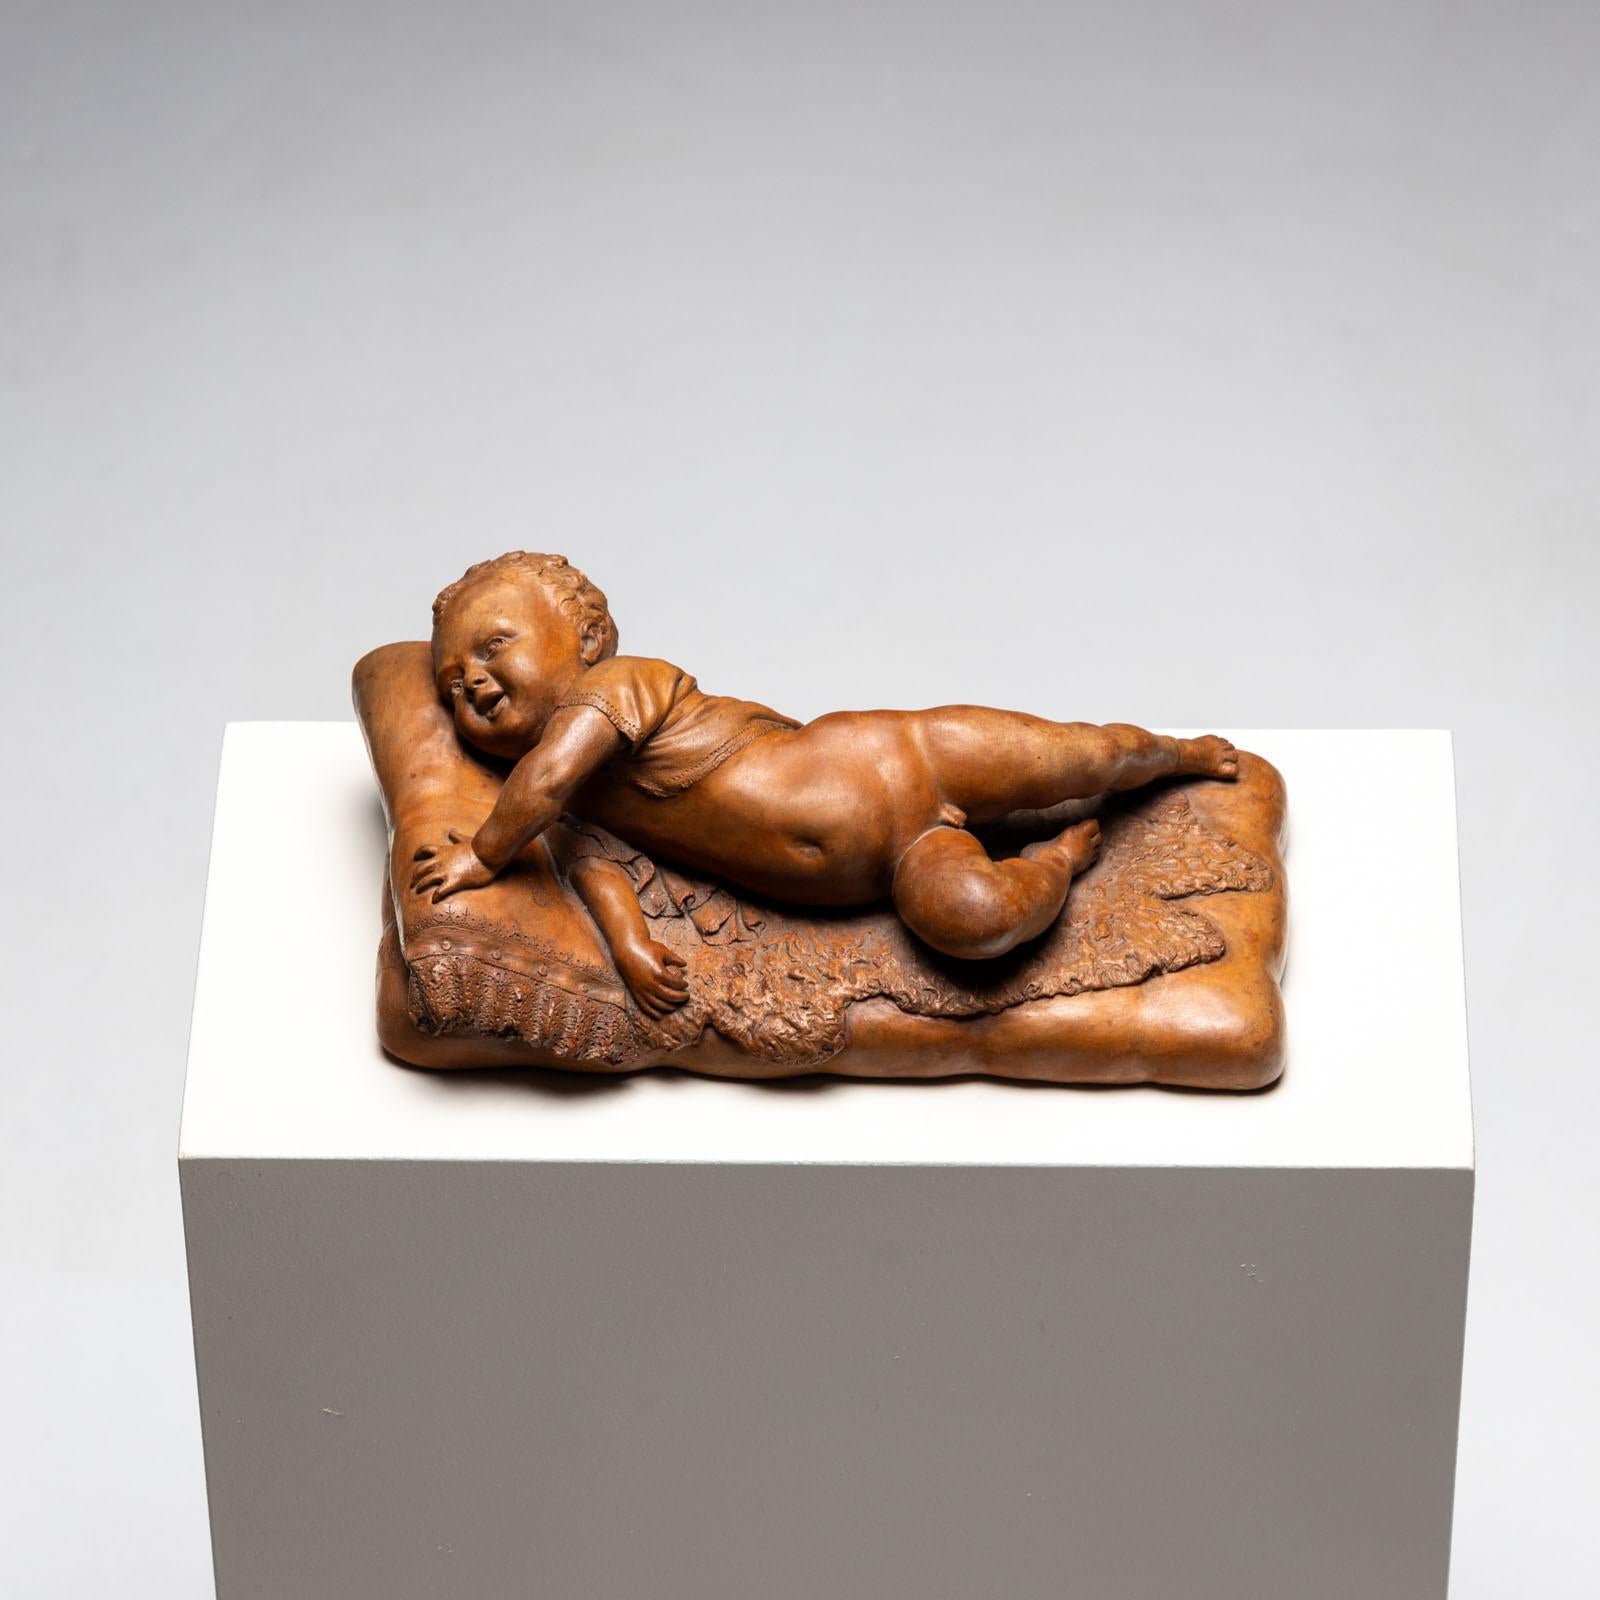 Small terracotta of a lying infant on fur and cushion with lace border. Signed at the head 23 No. ... 92, F. SANS.